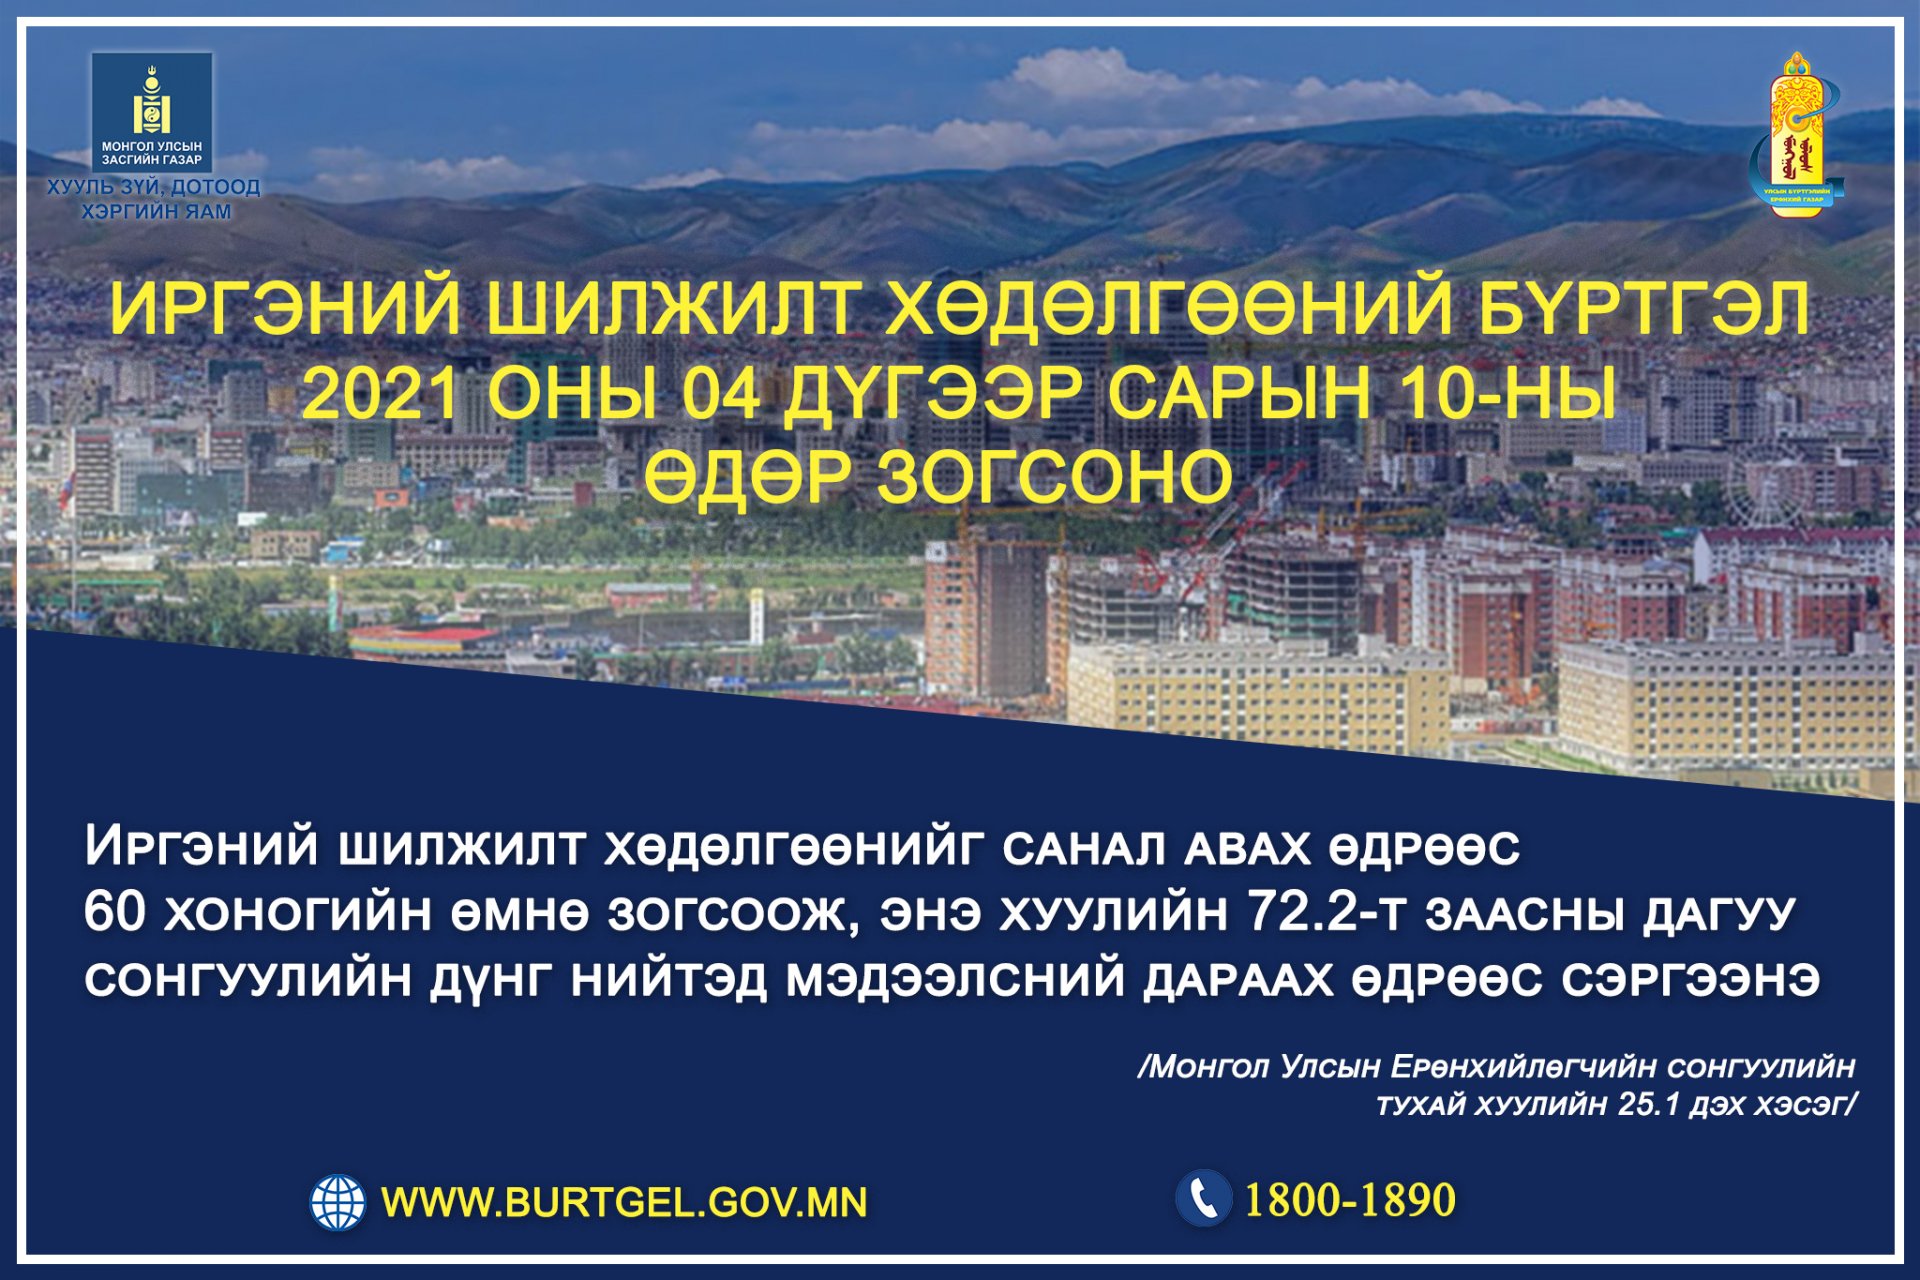 Registration of civil migration will be stopped on April 10, 2021